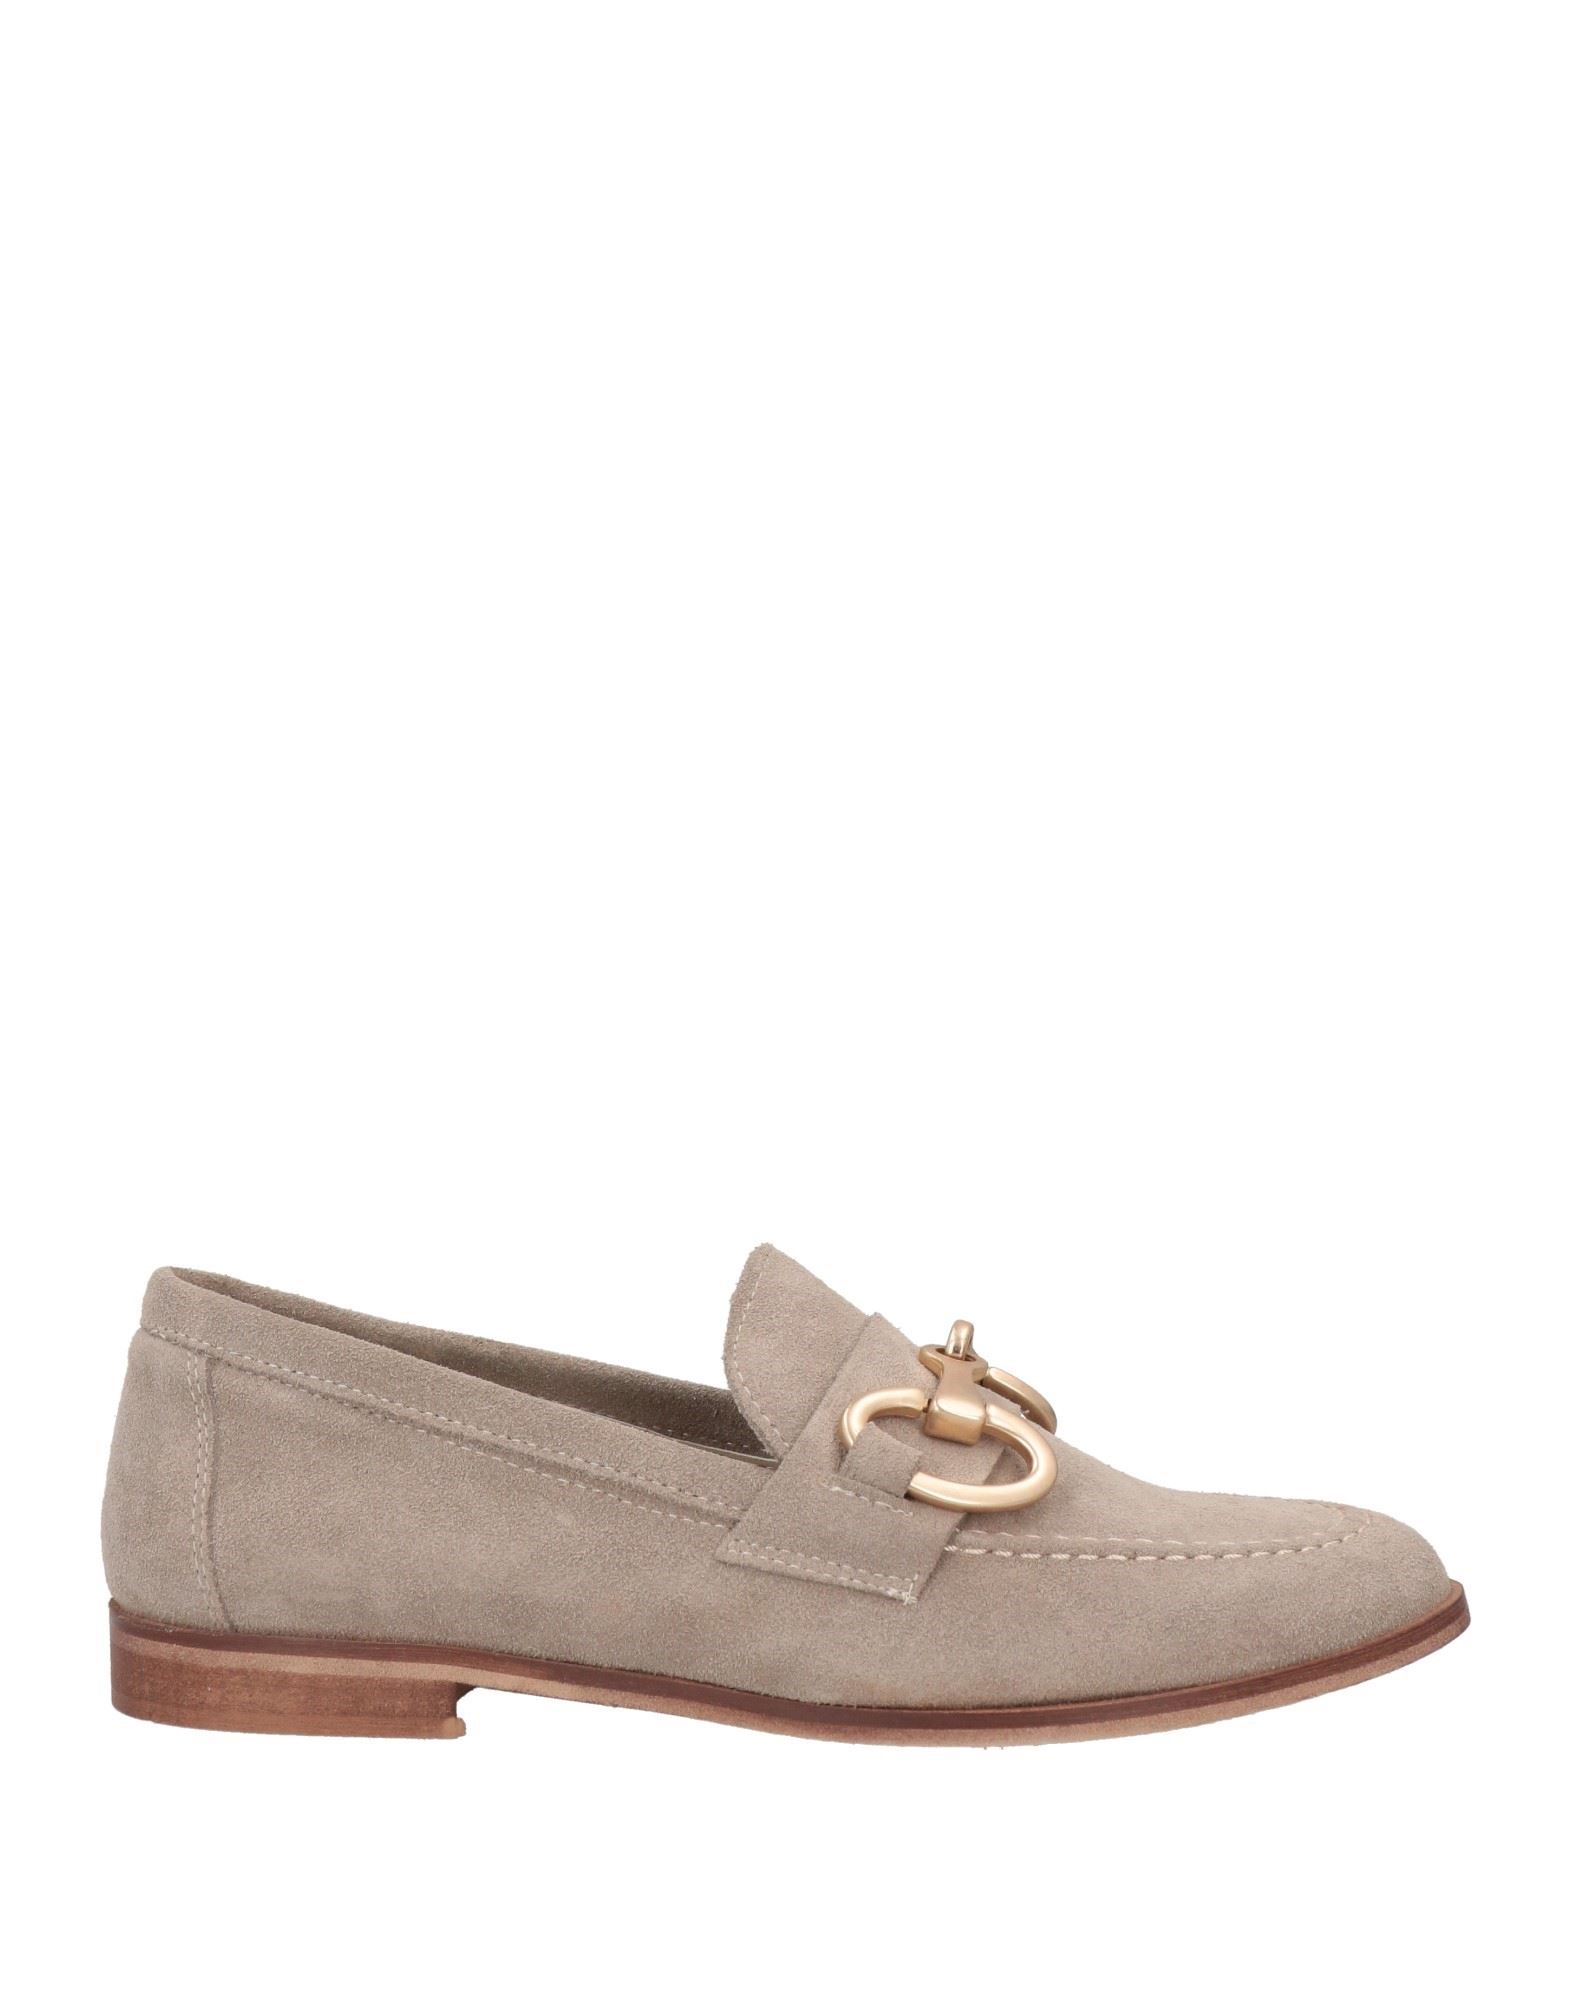 STELE STELE WOMAN LOAFERS GREY SIZE 8 SOFT LEATHER